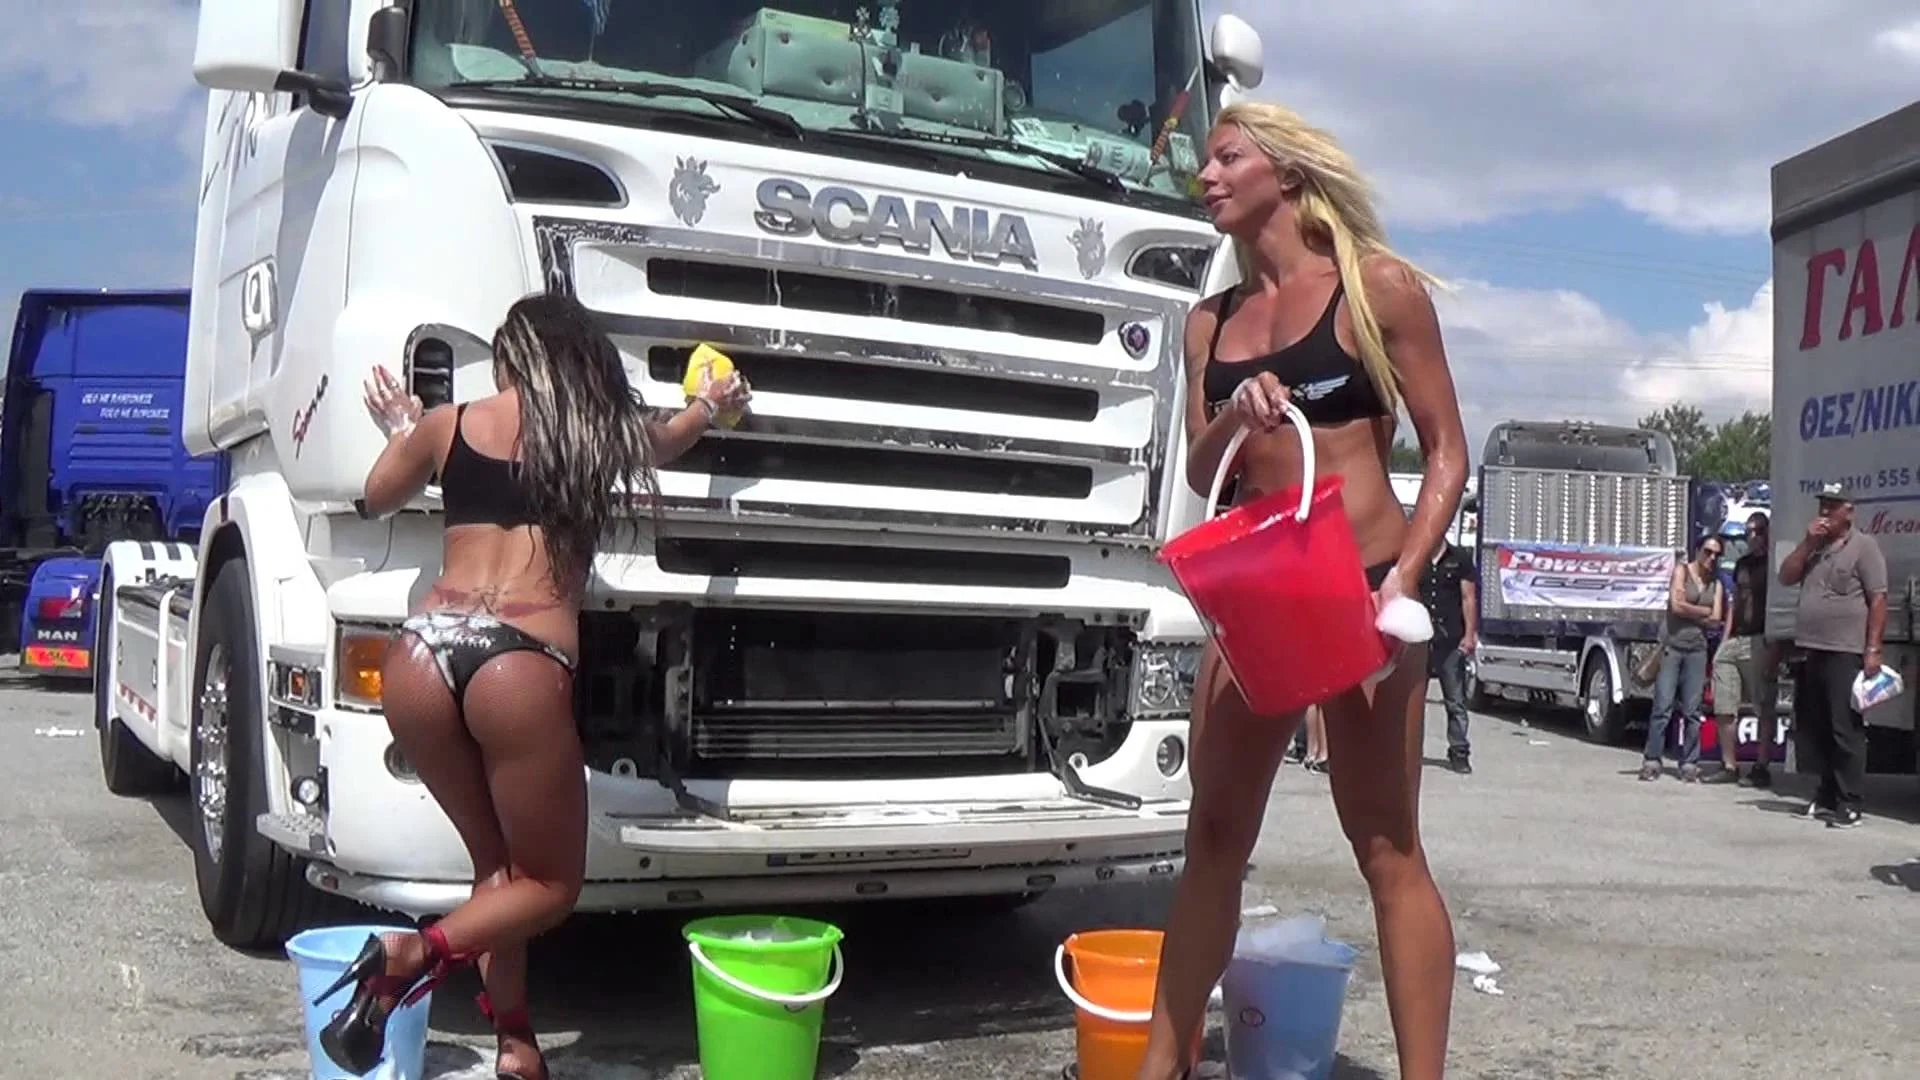 Truck Wash Gikas Scania the brunette girl is really cute sexy